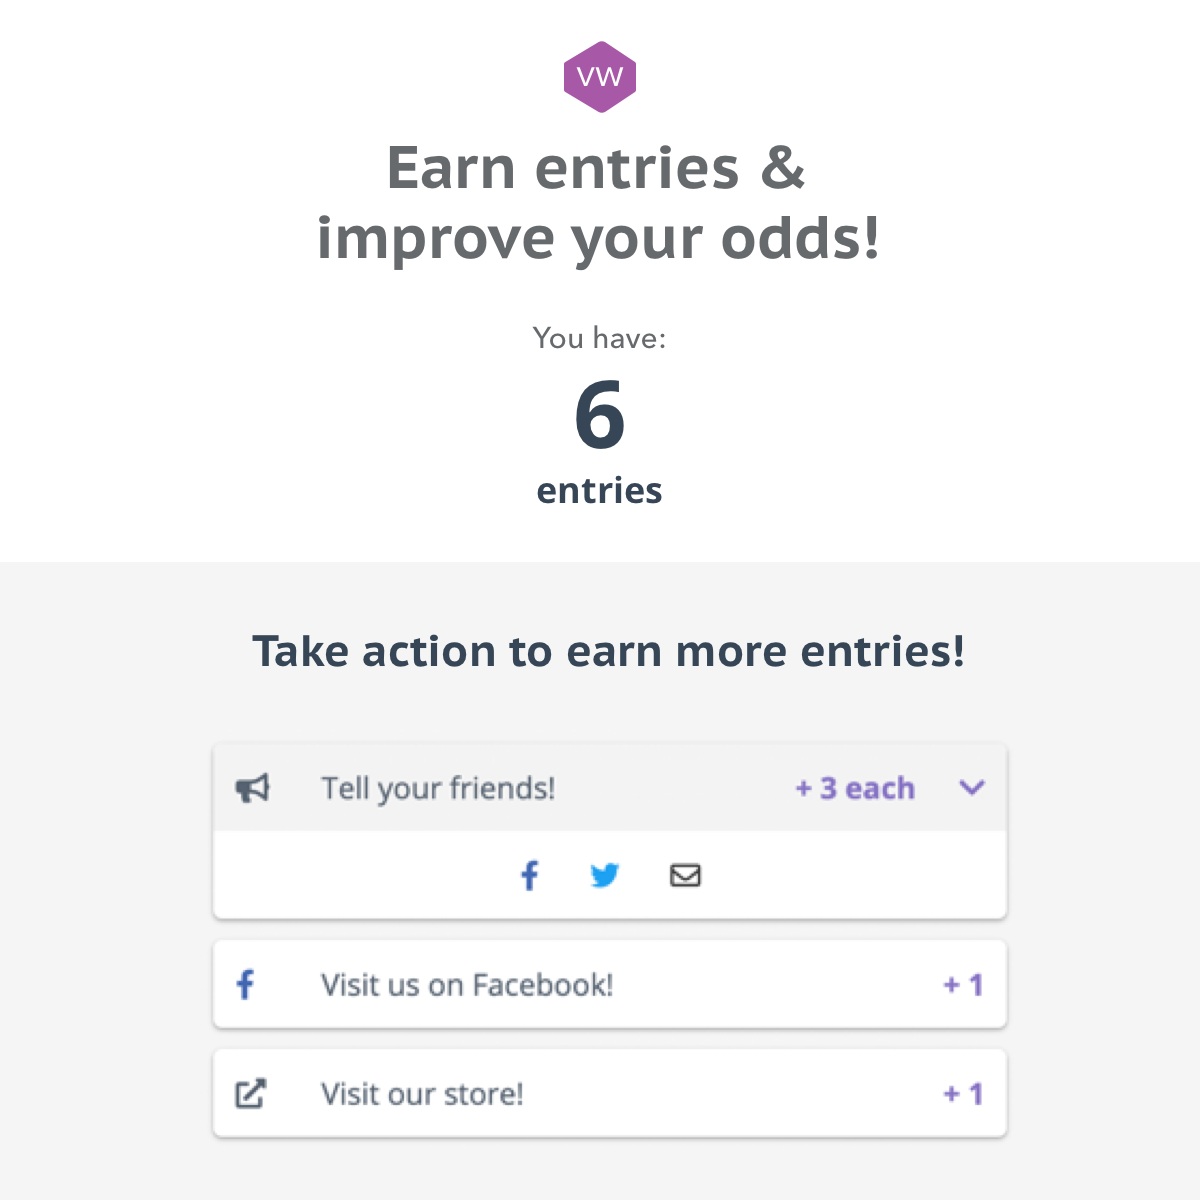 Example KickoffLabs sweepstakes campaign.